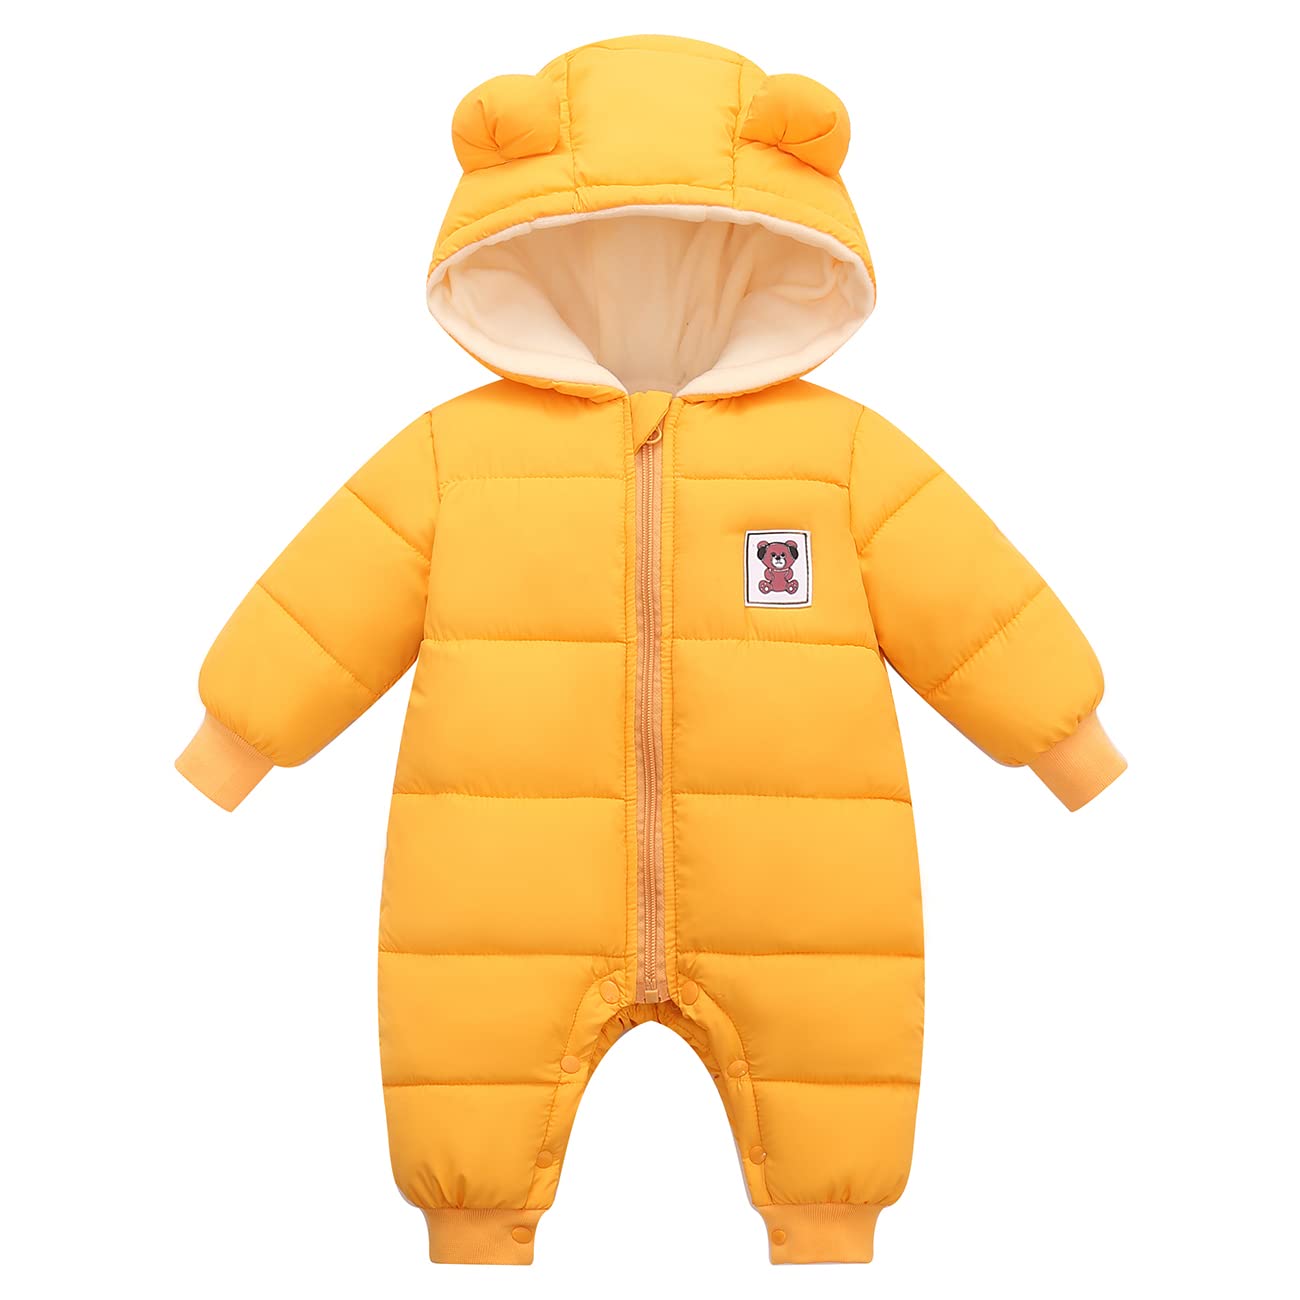 Fumdonnie Baby Boys Snowsuit Toddler Winter Girl Clothes Infant Coat Jacket 6-9 9-12 Month